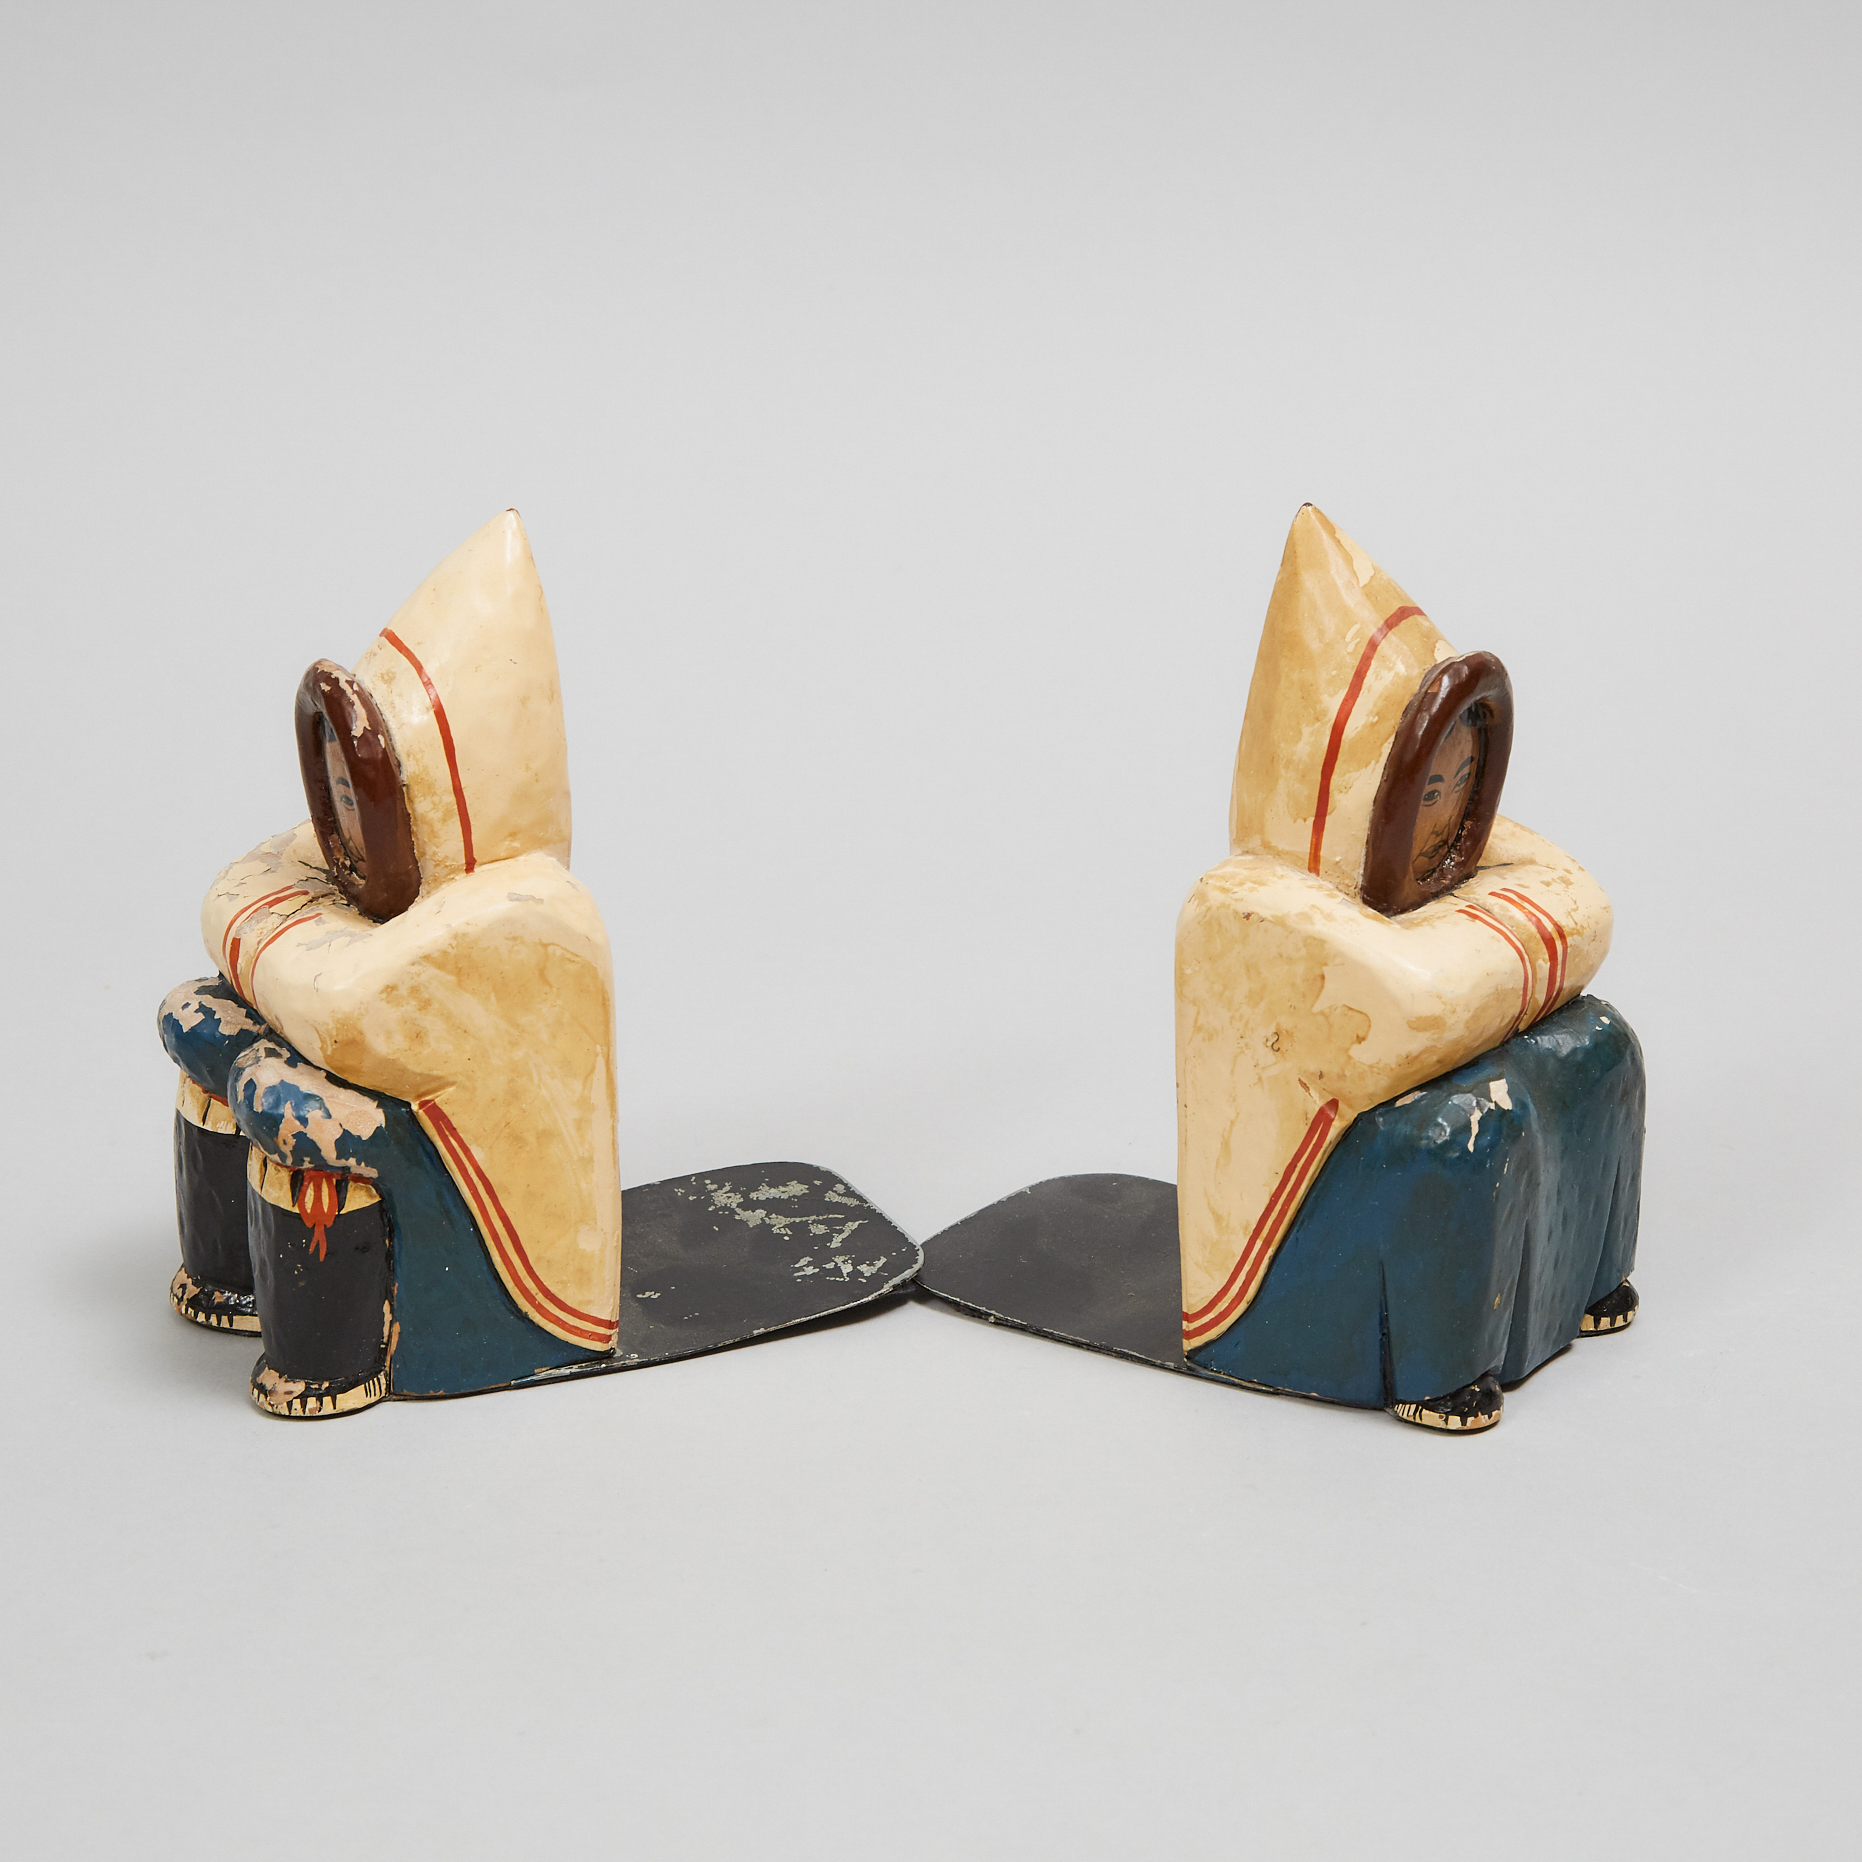 Pair of Grenfell Labrador Industries Polychromed Wood Figural Bookends, c.1930